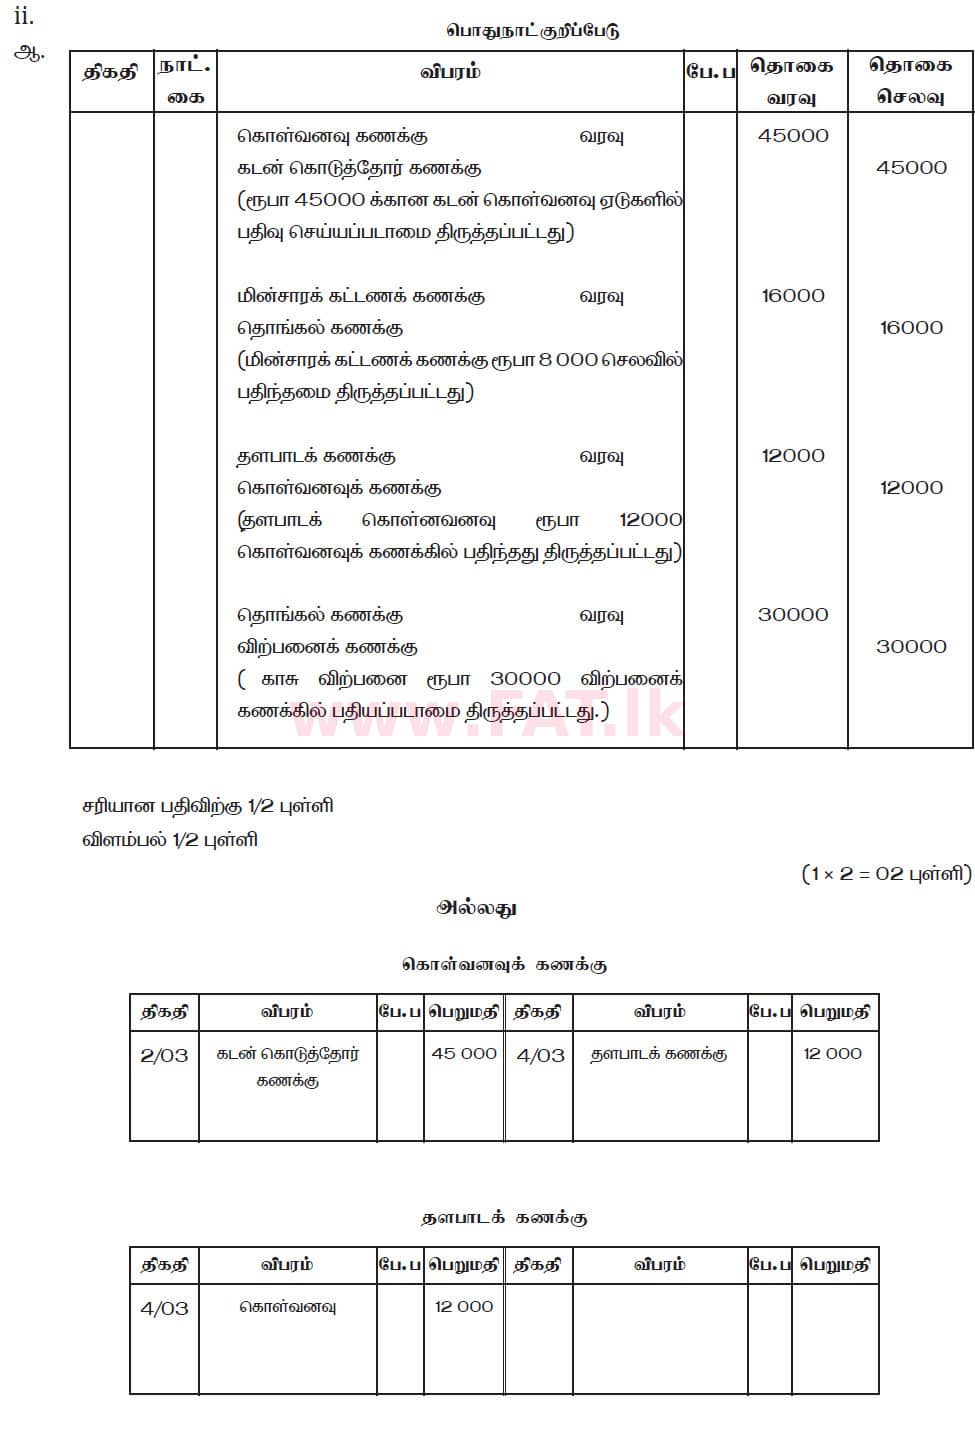 National Syllabus : Ordinary Level (O/L) Business and Accounting Studies - 2019 March - Paper II (தமிழ் Medium) 6 5992